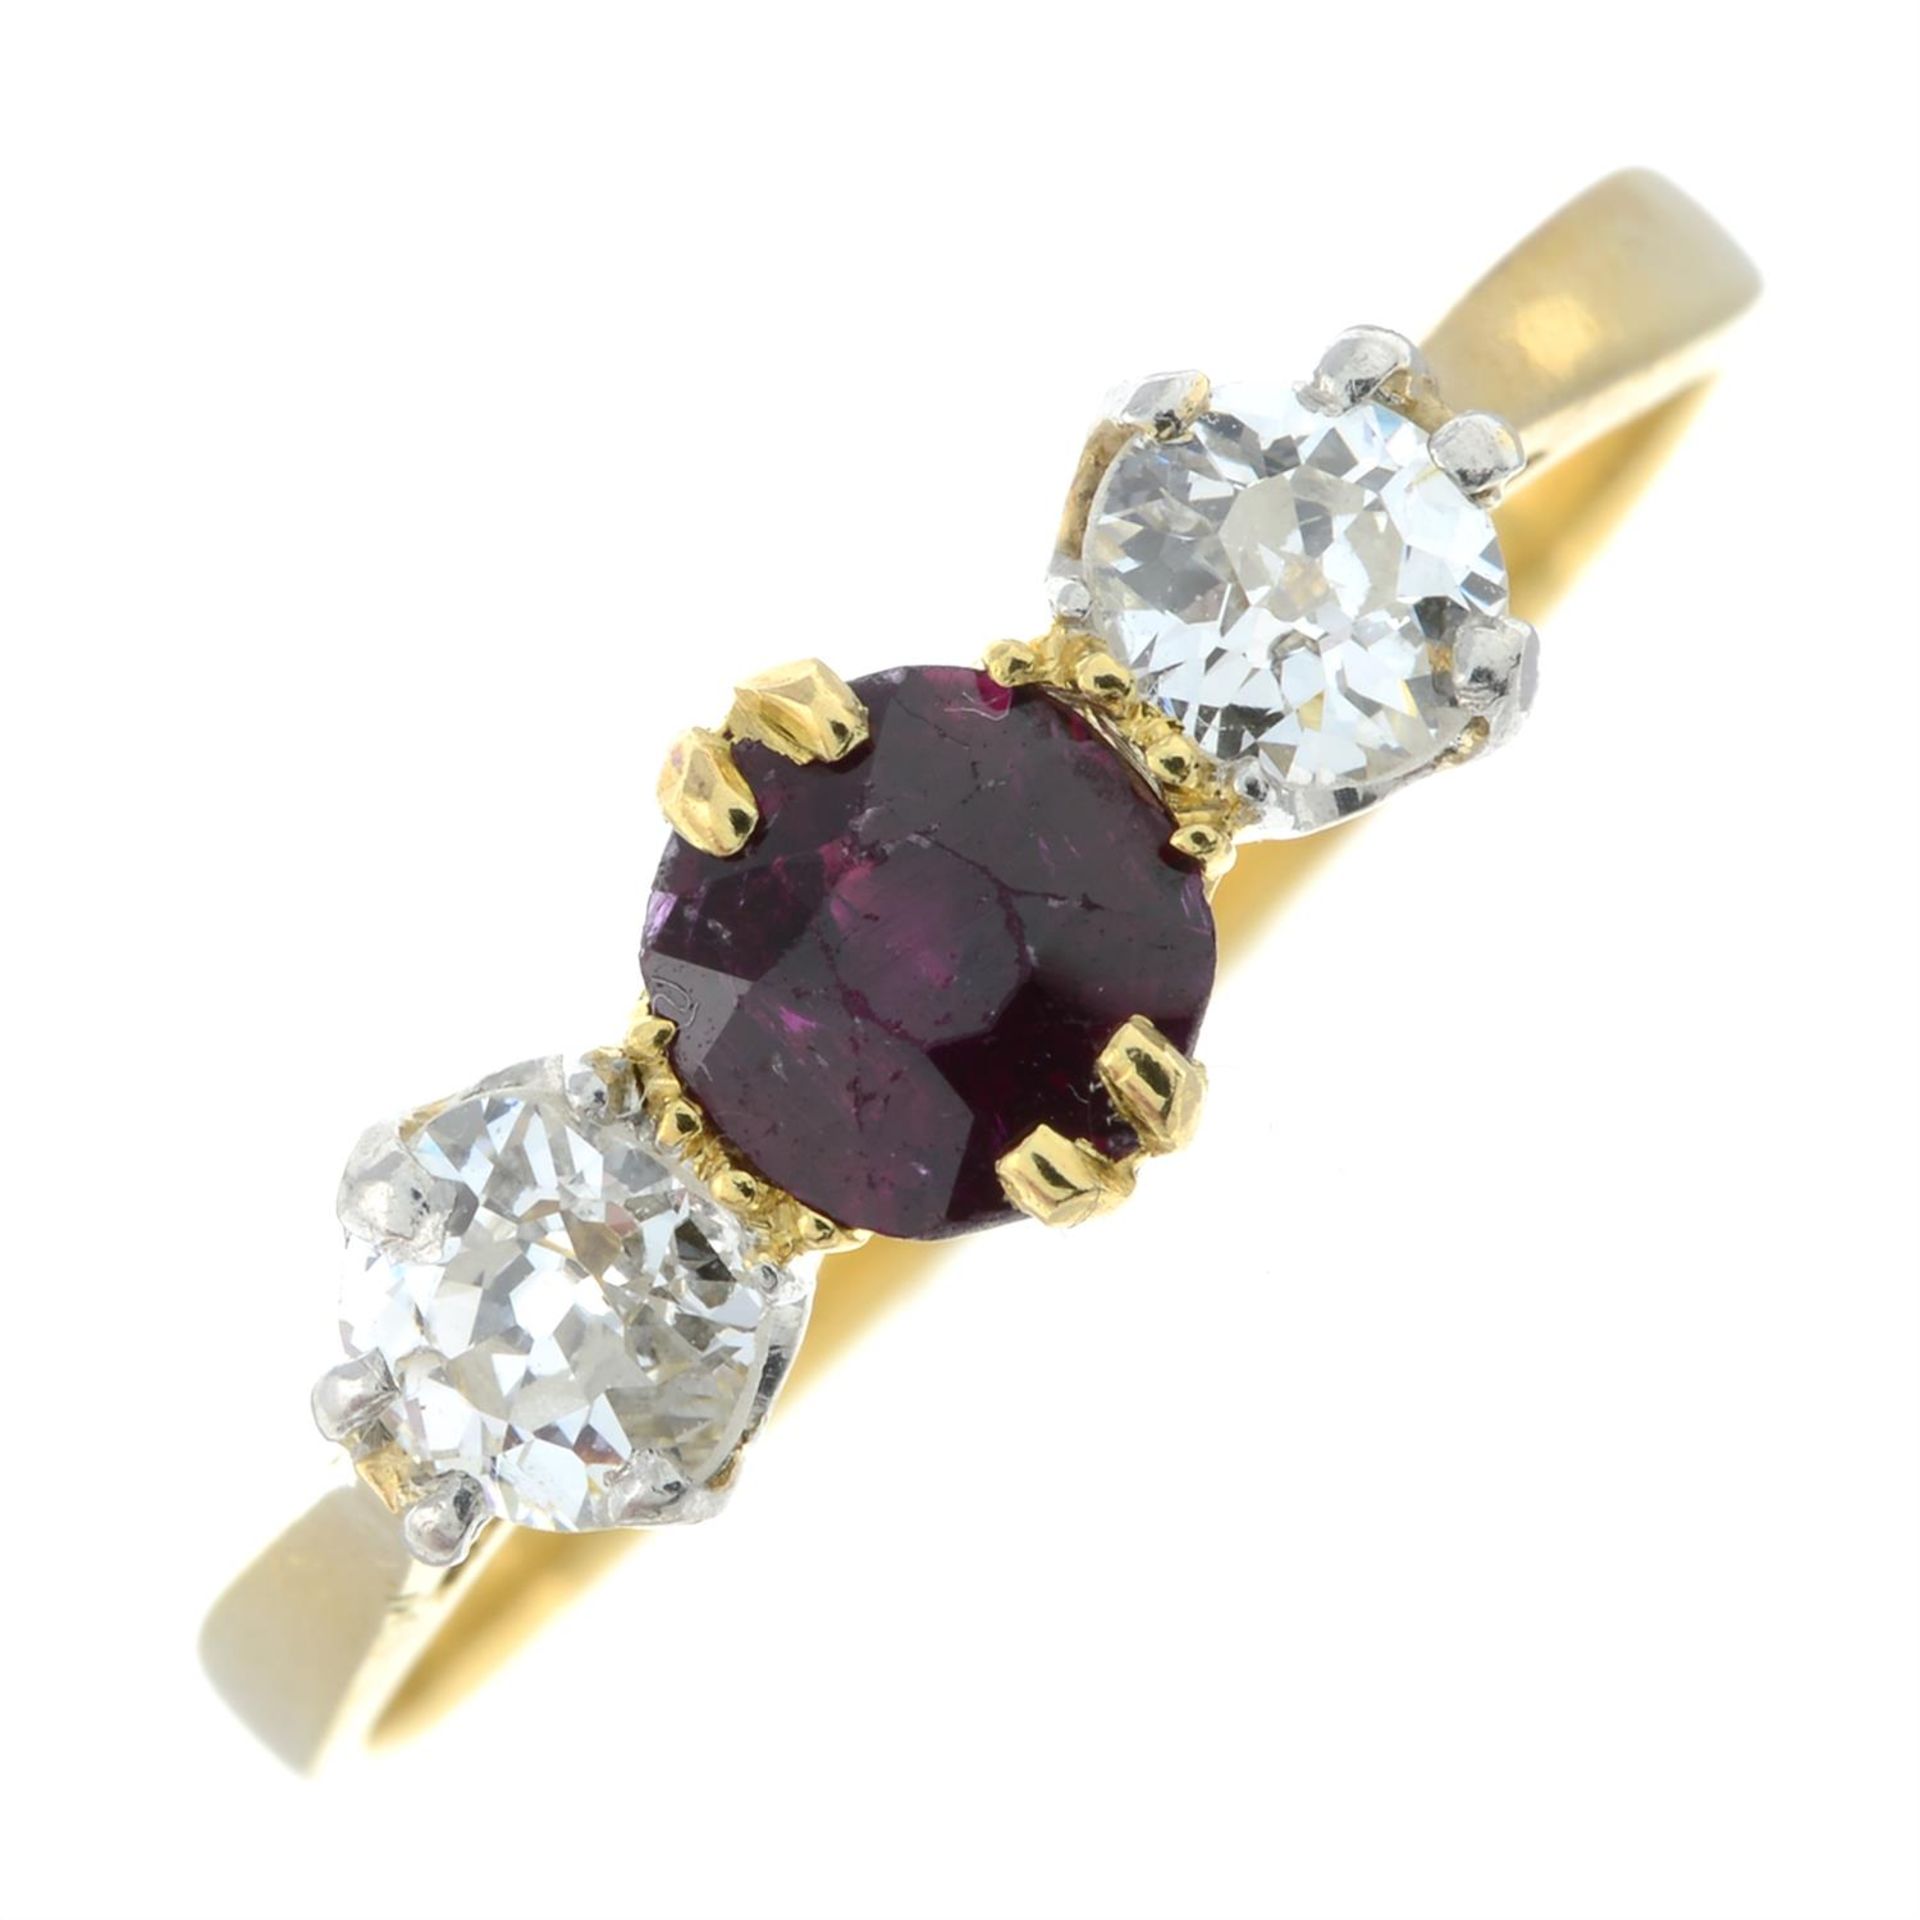 An early to mid 20th century 18ct gold ruby and old-cut diamond three-stone ring.